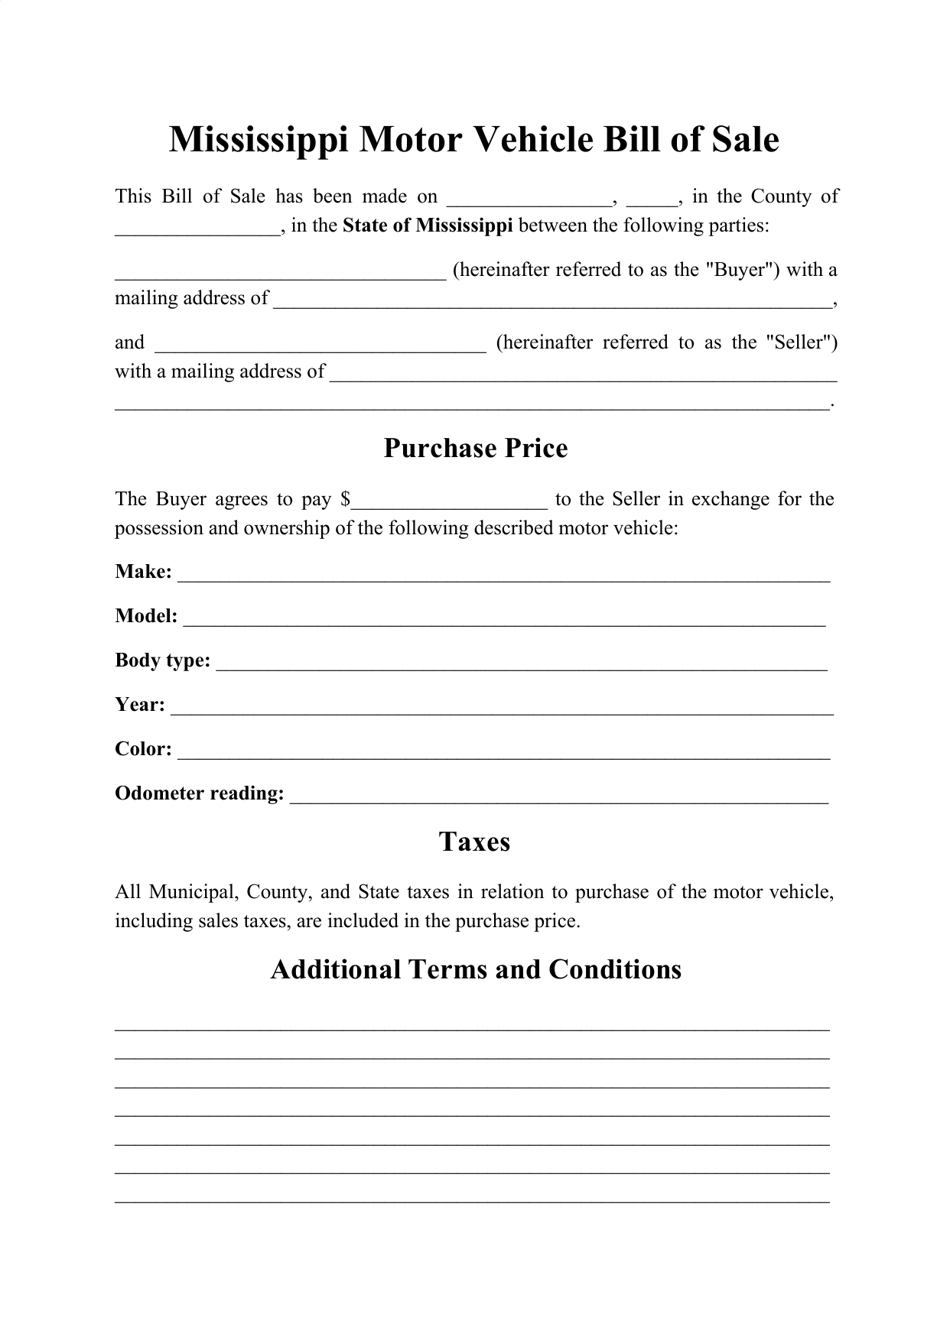 Motor Vehicle Bill of Sale Form - Mississippi, Page 1